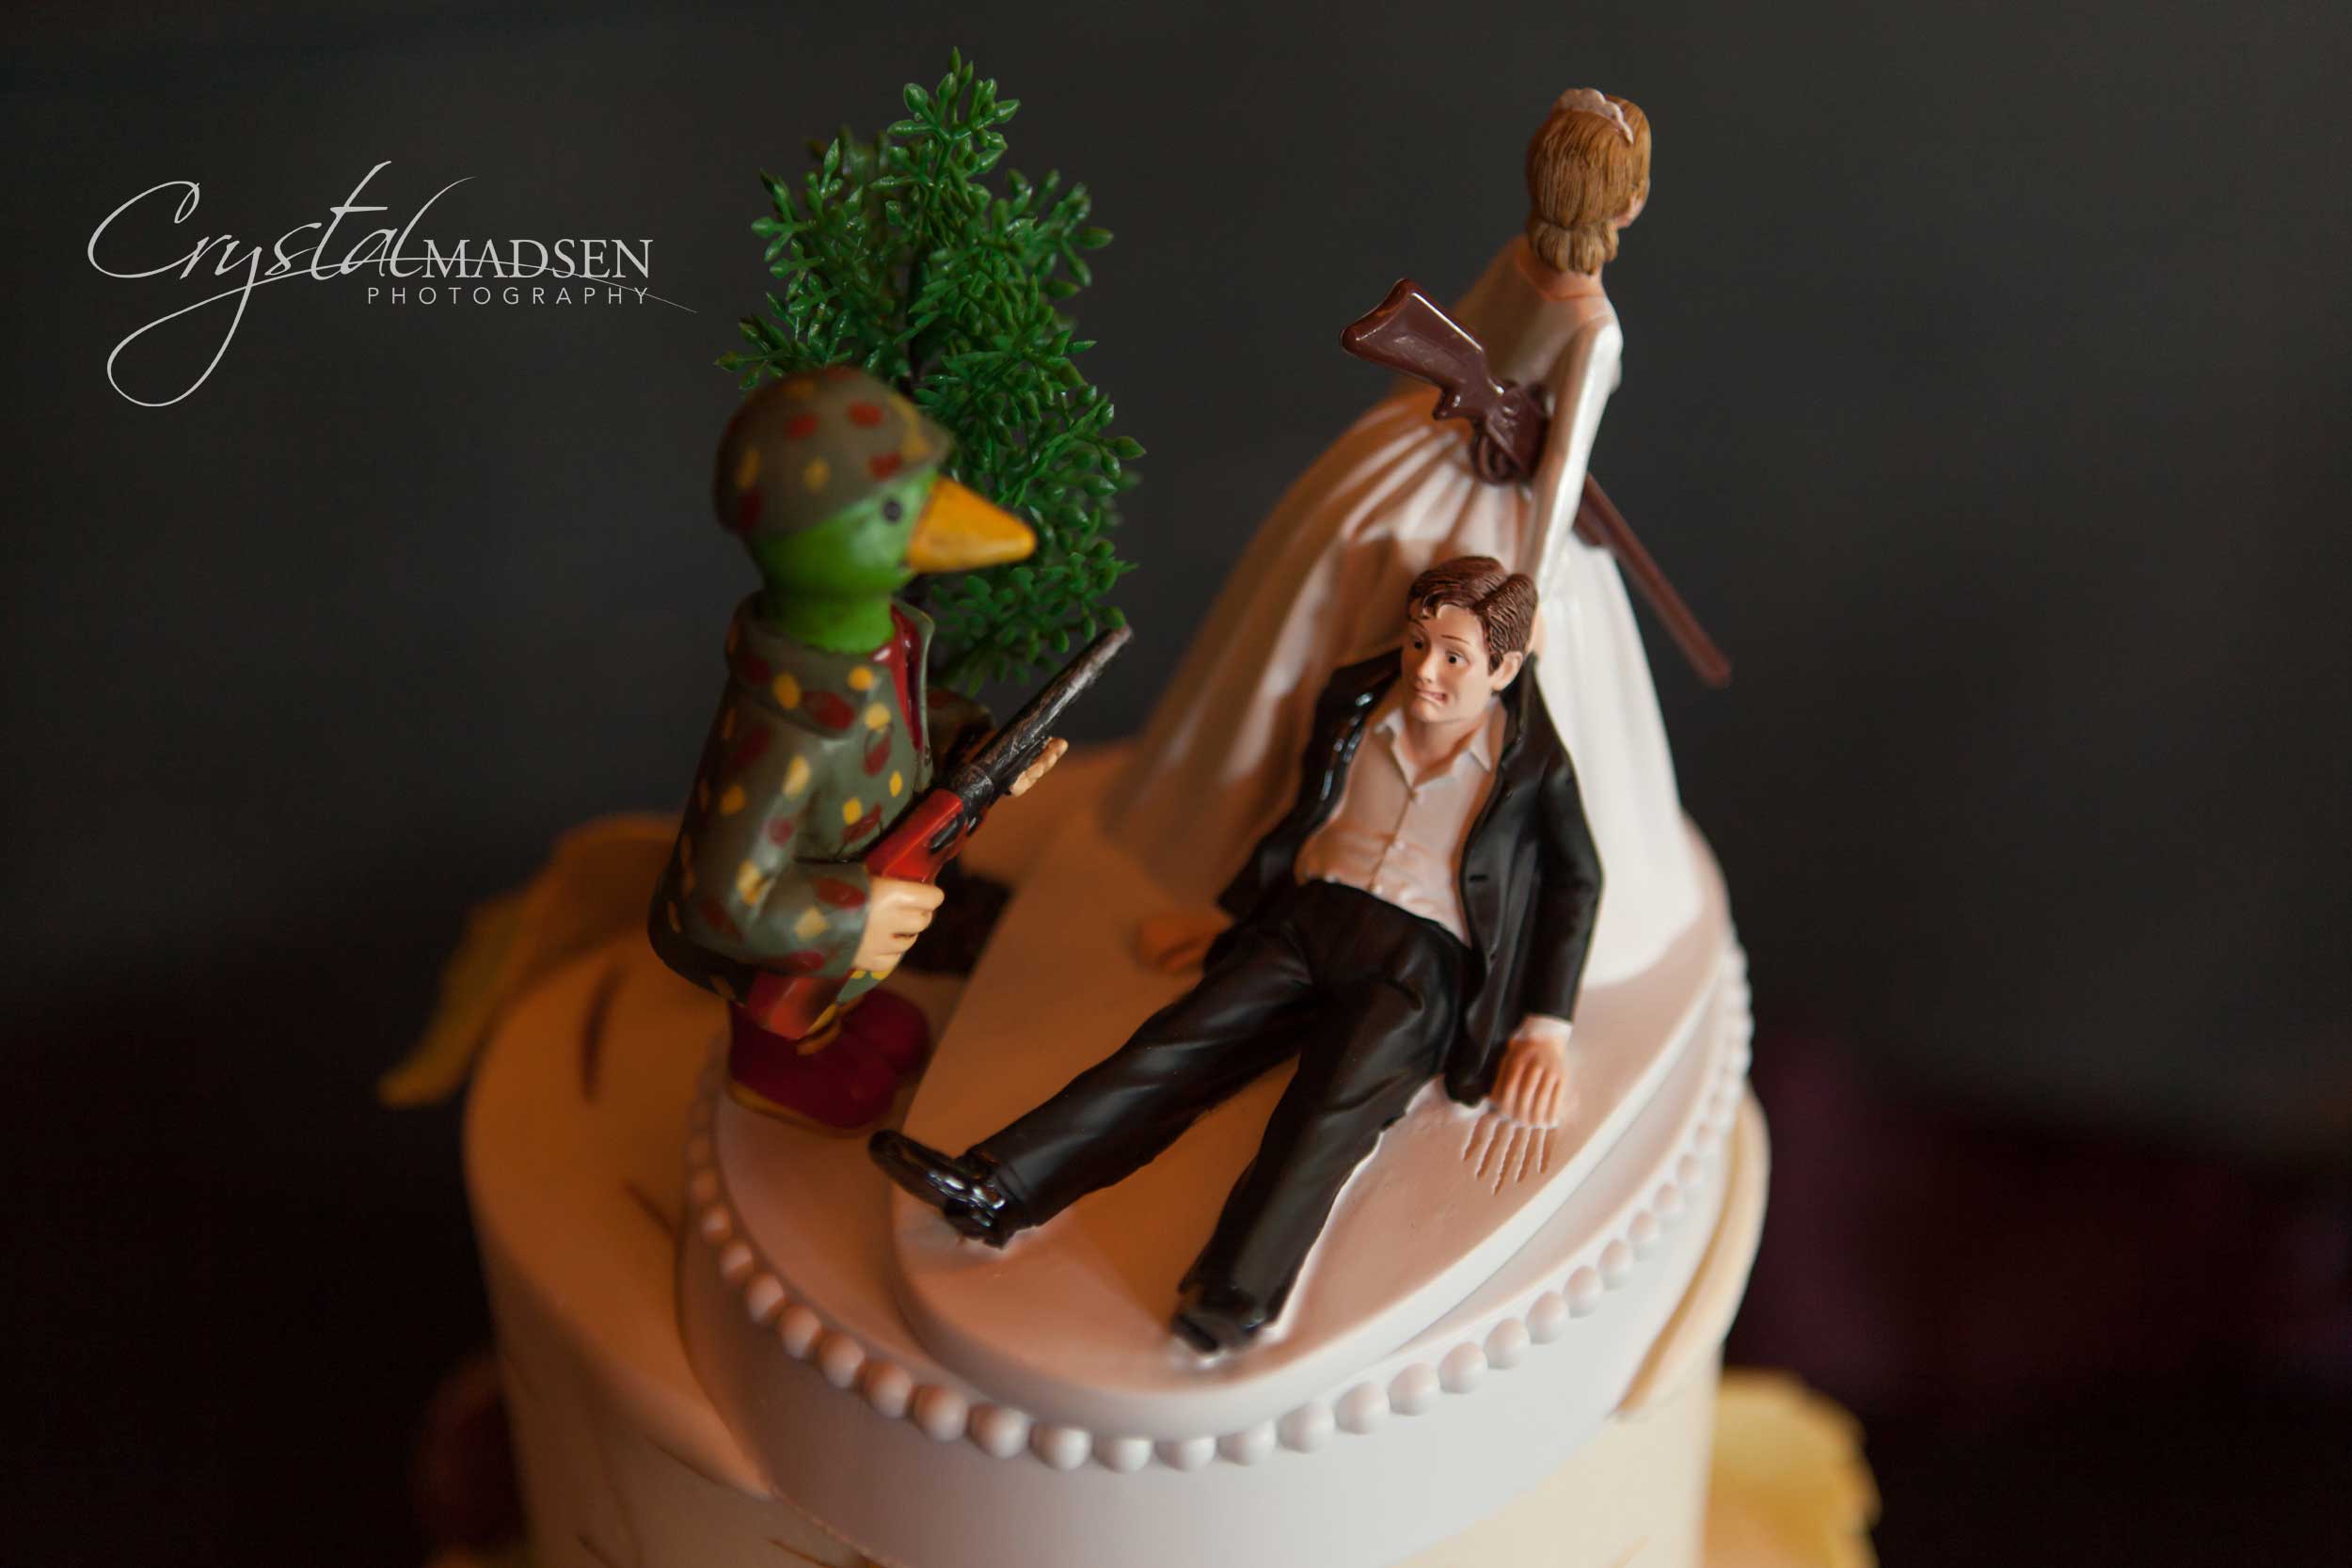 Humorous Cake Toppers